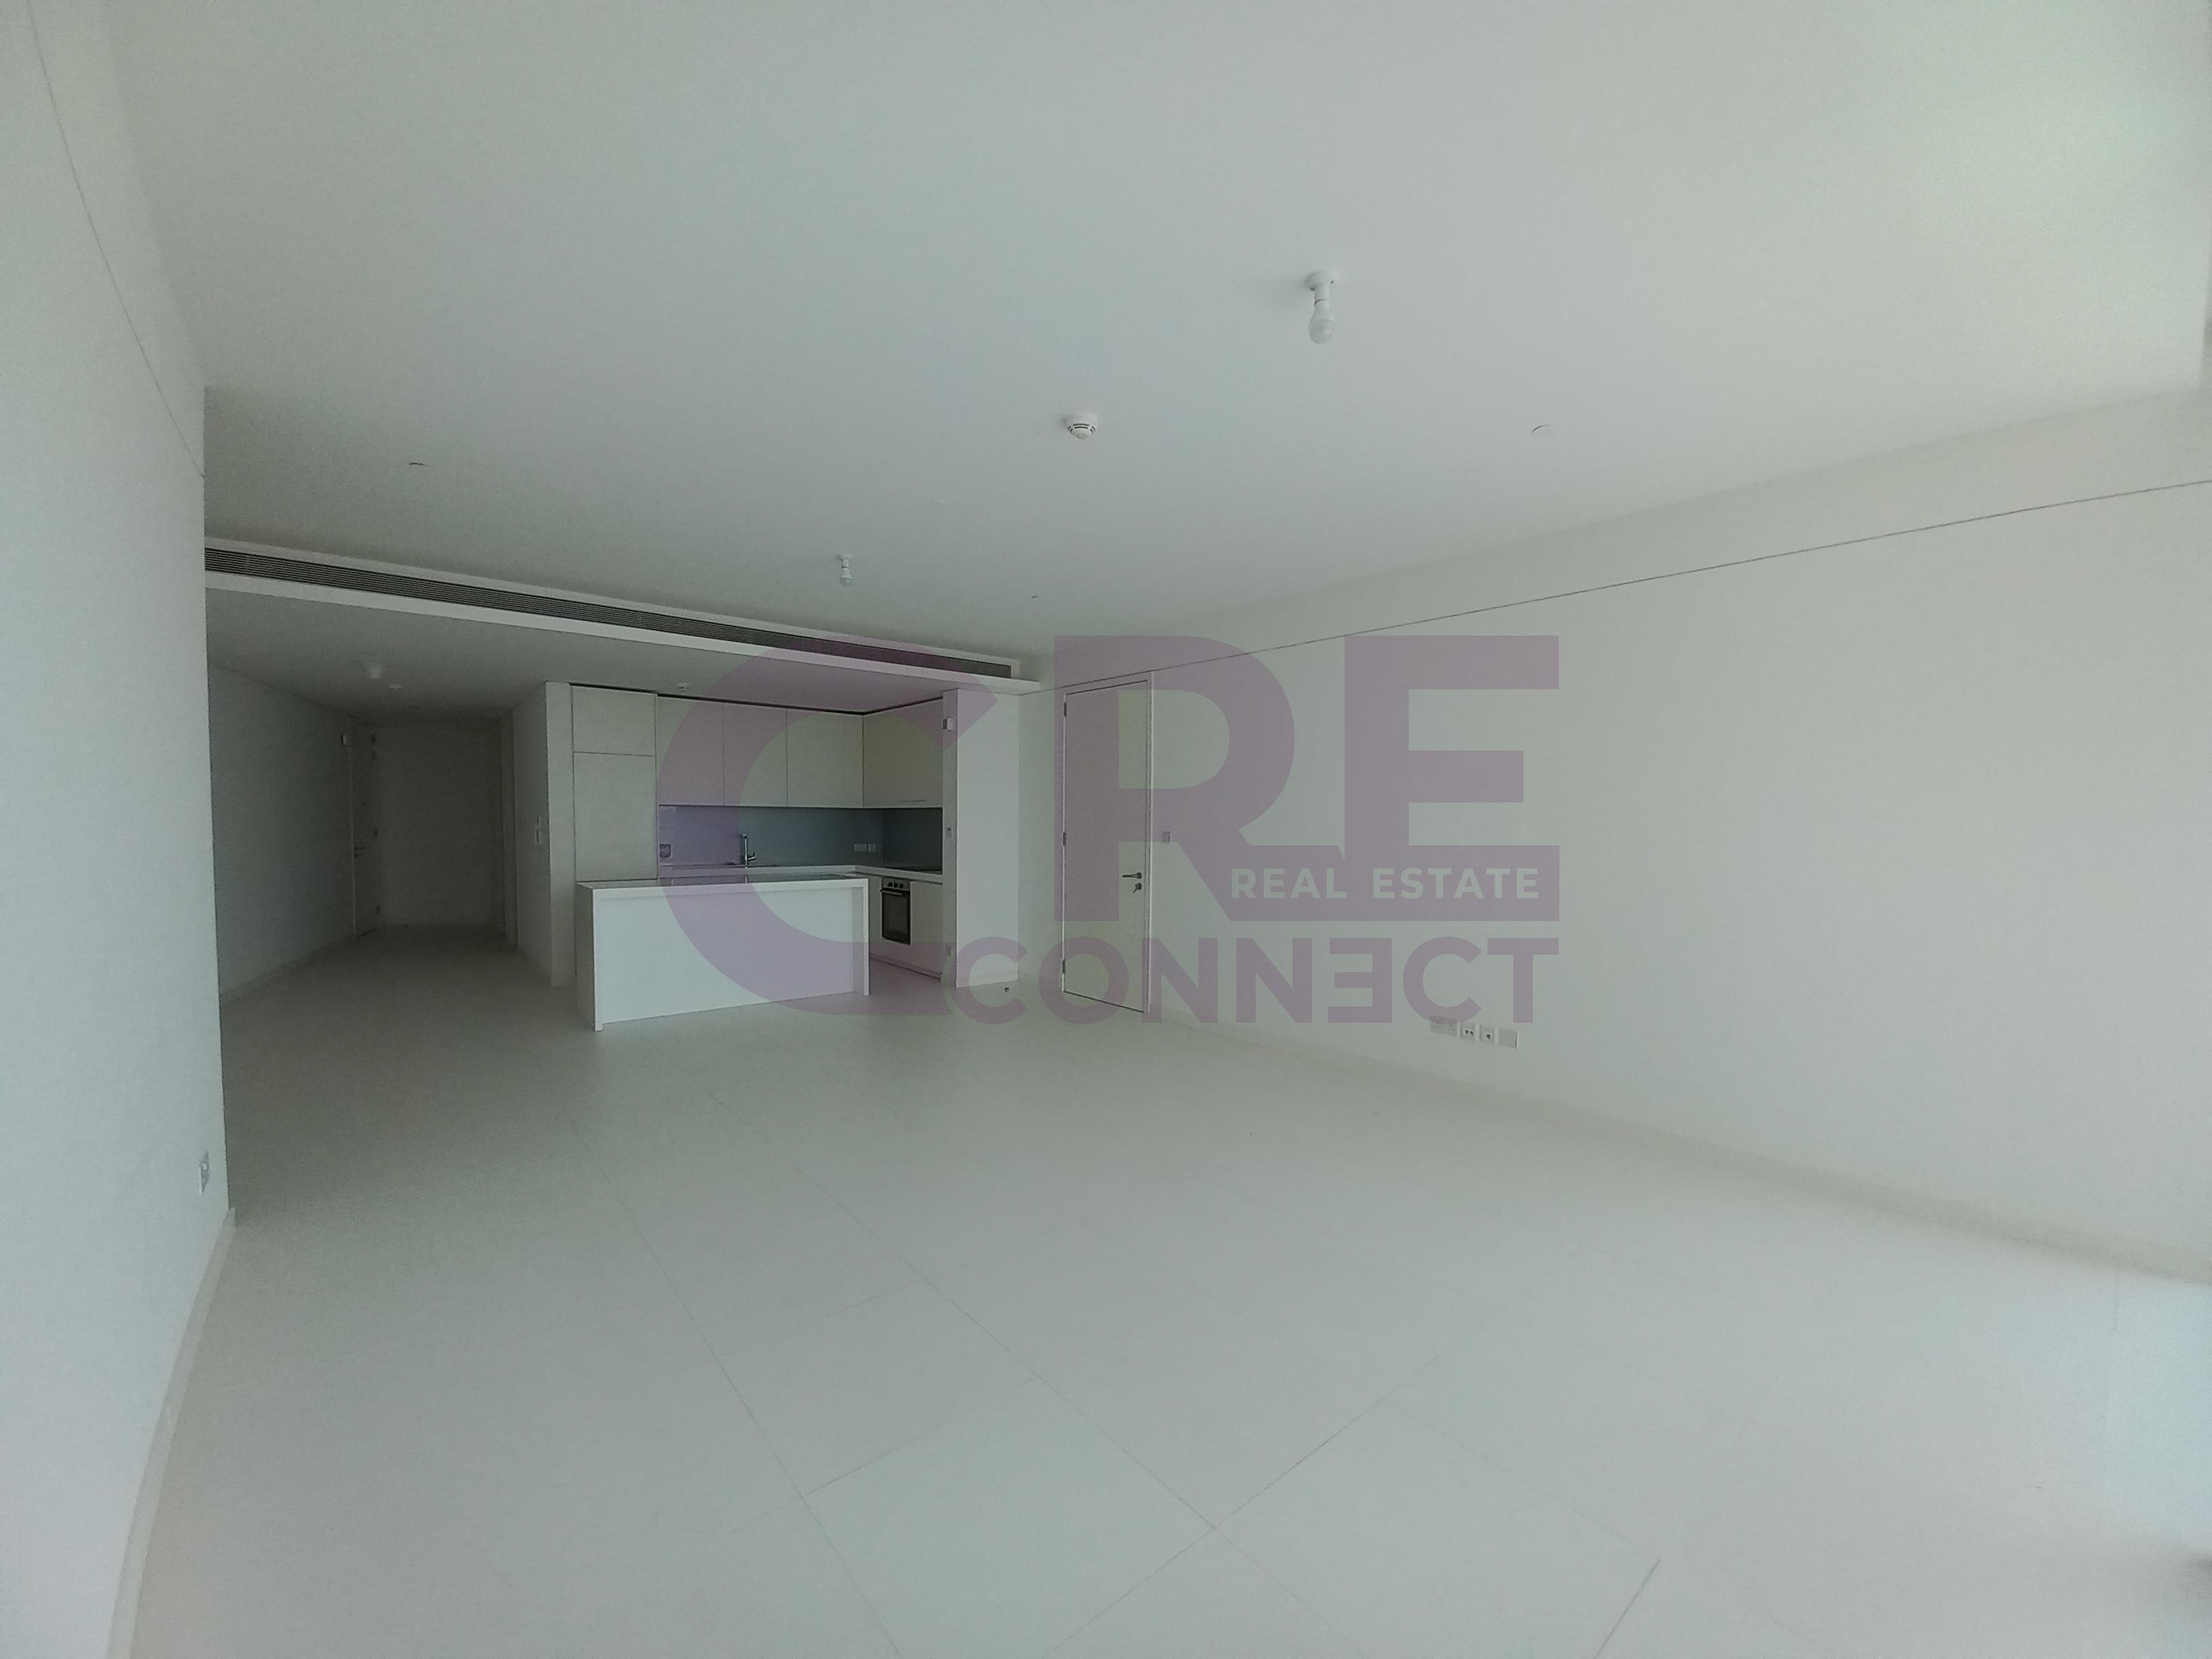 2 bed, 3 bath Apartment for rent in RDK Towers, Najmat Abu Dhabi, Al Reem Island, Abu Dhabi for price AED 115000 yearly 